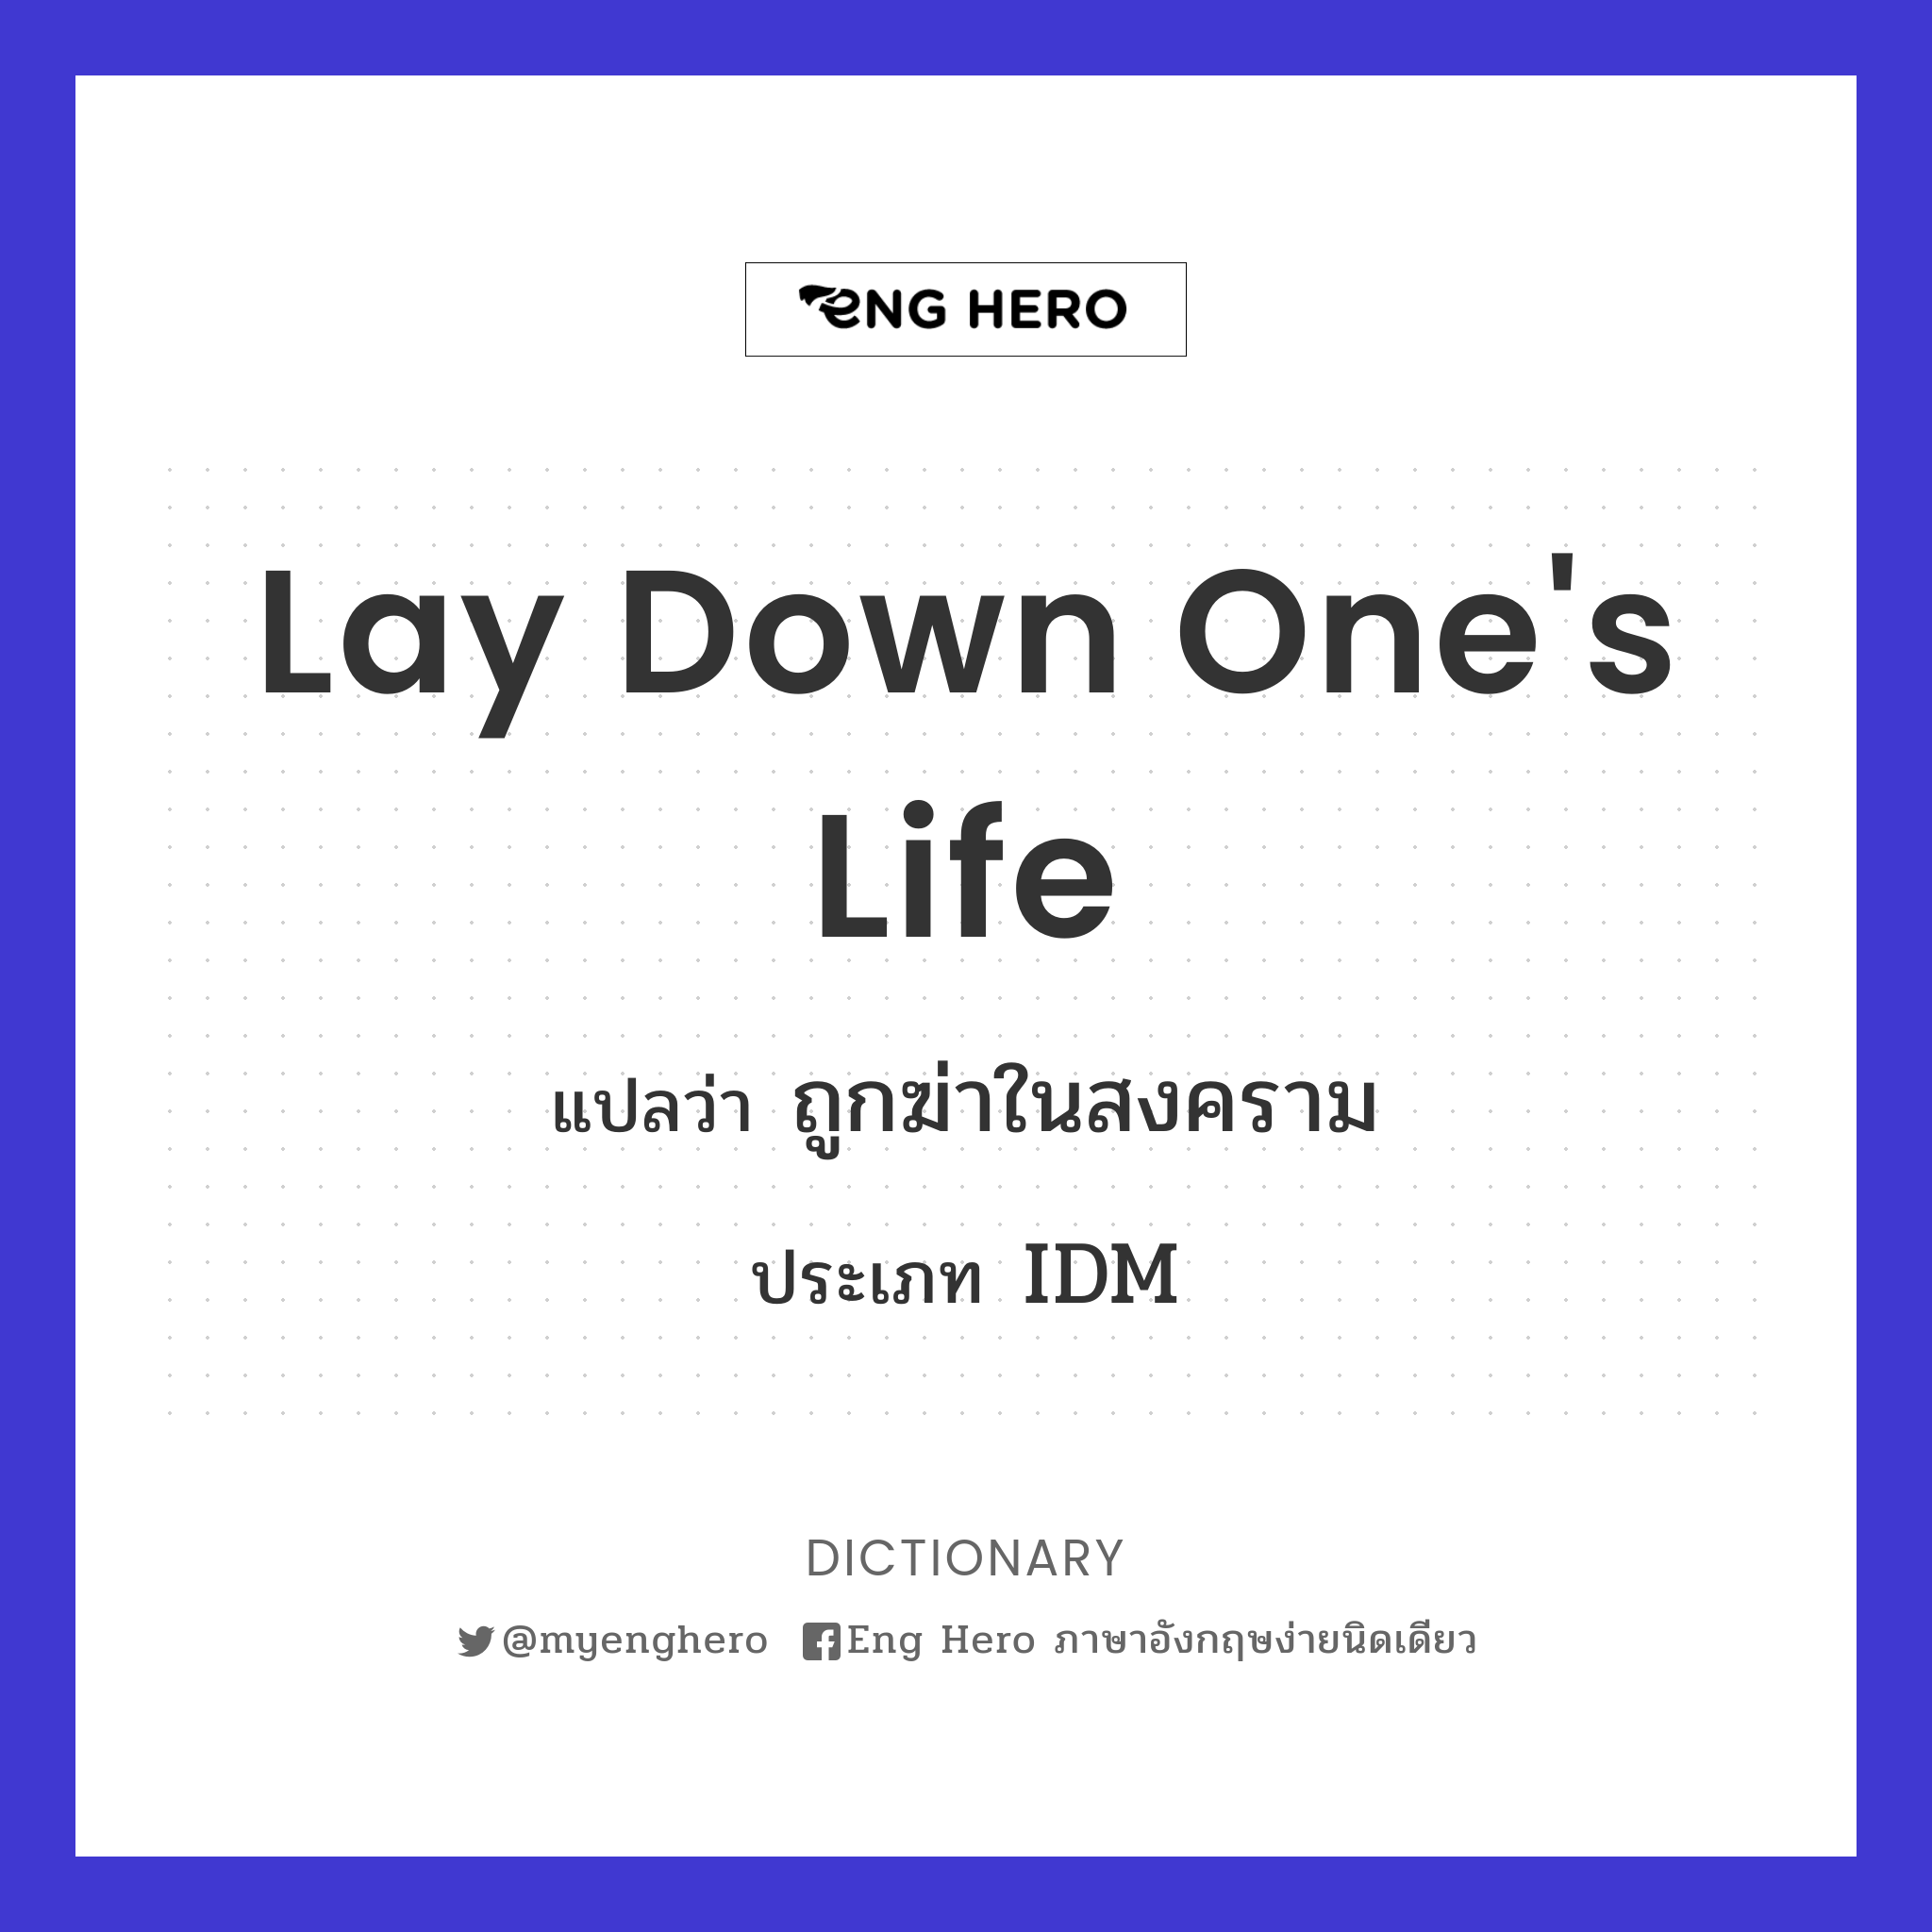 lay down one's life